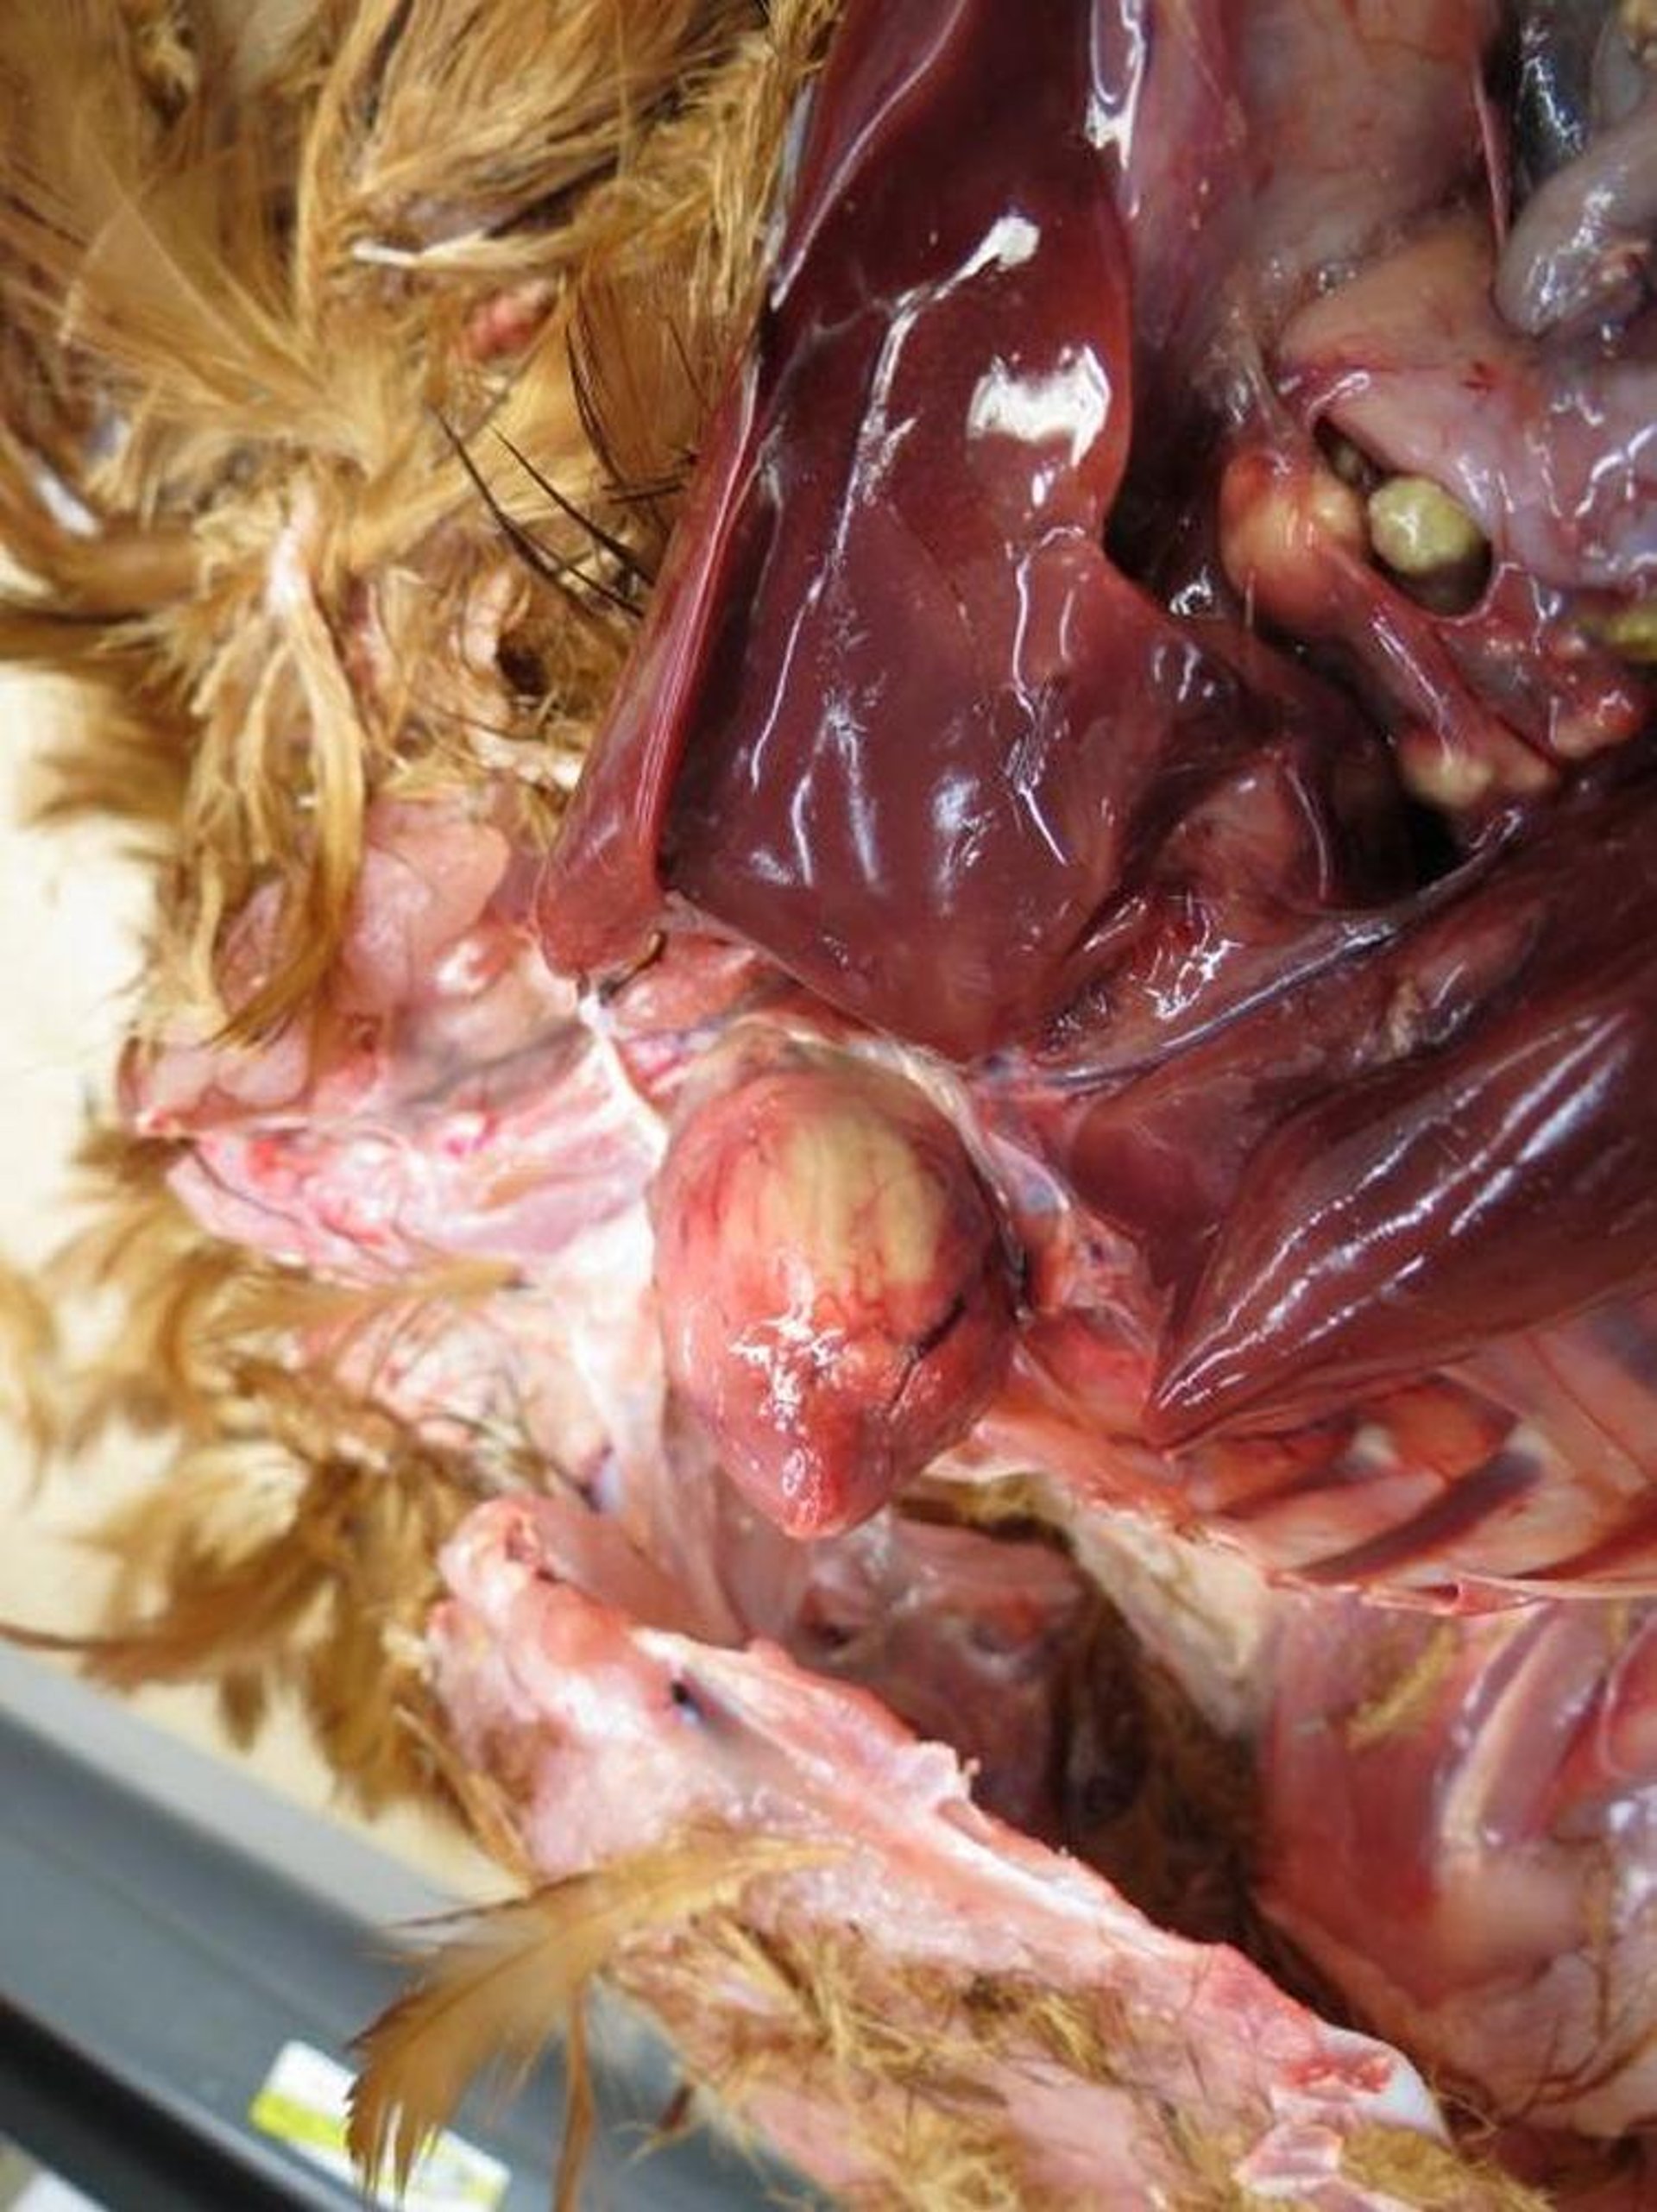 Septicemic listeriosis, chicken